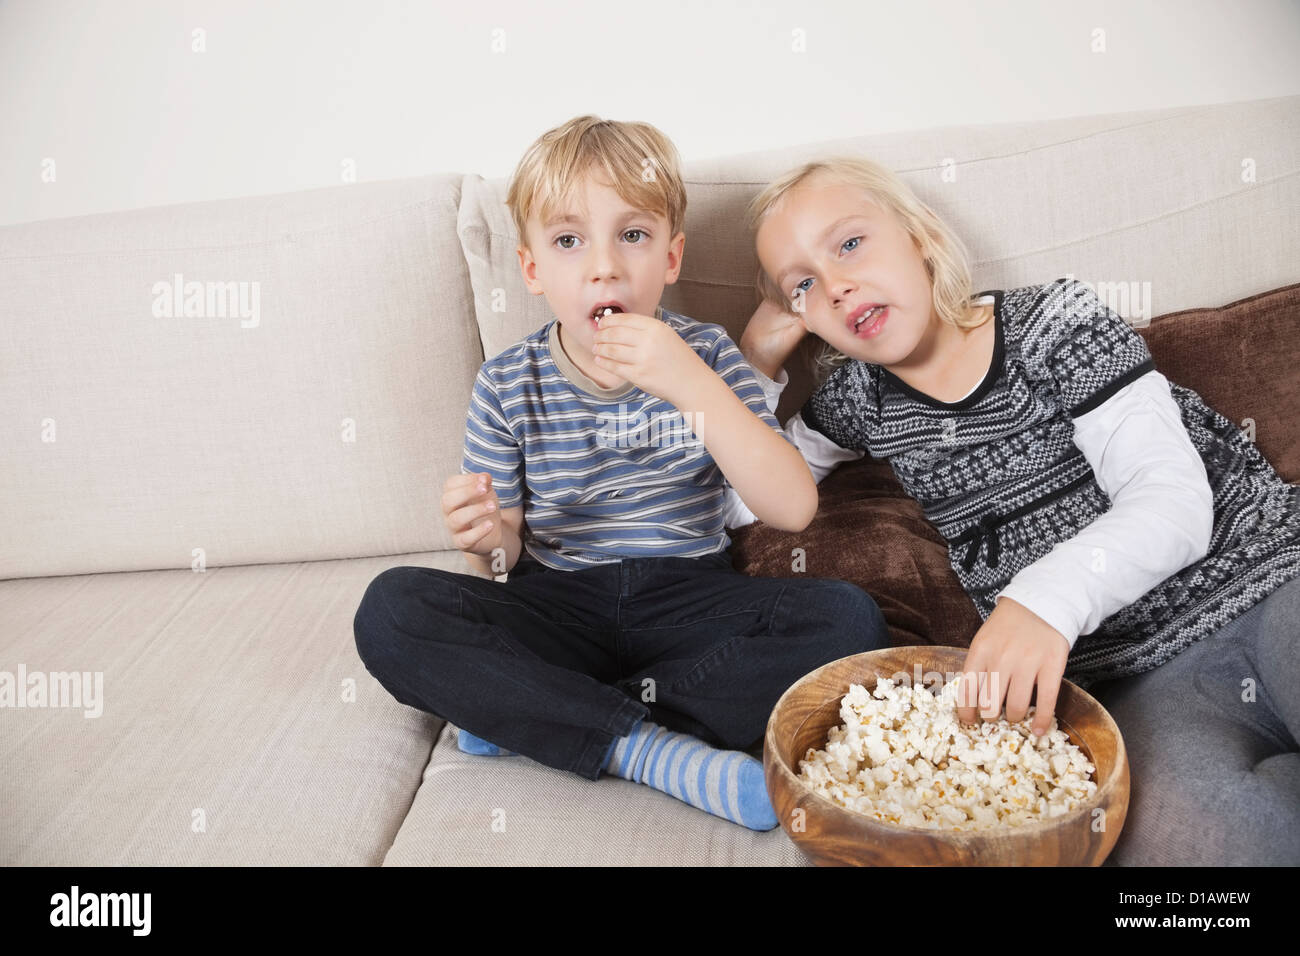 brother sister watching TV eating popcorn Stock Photo